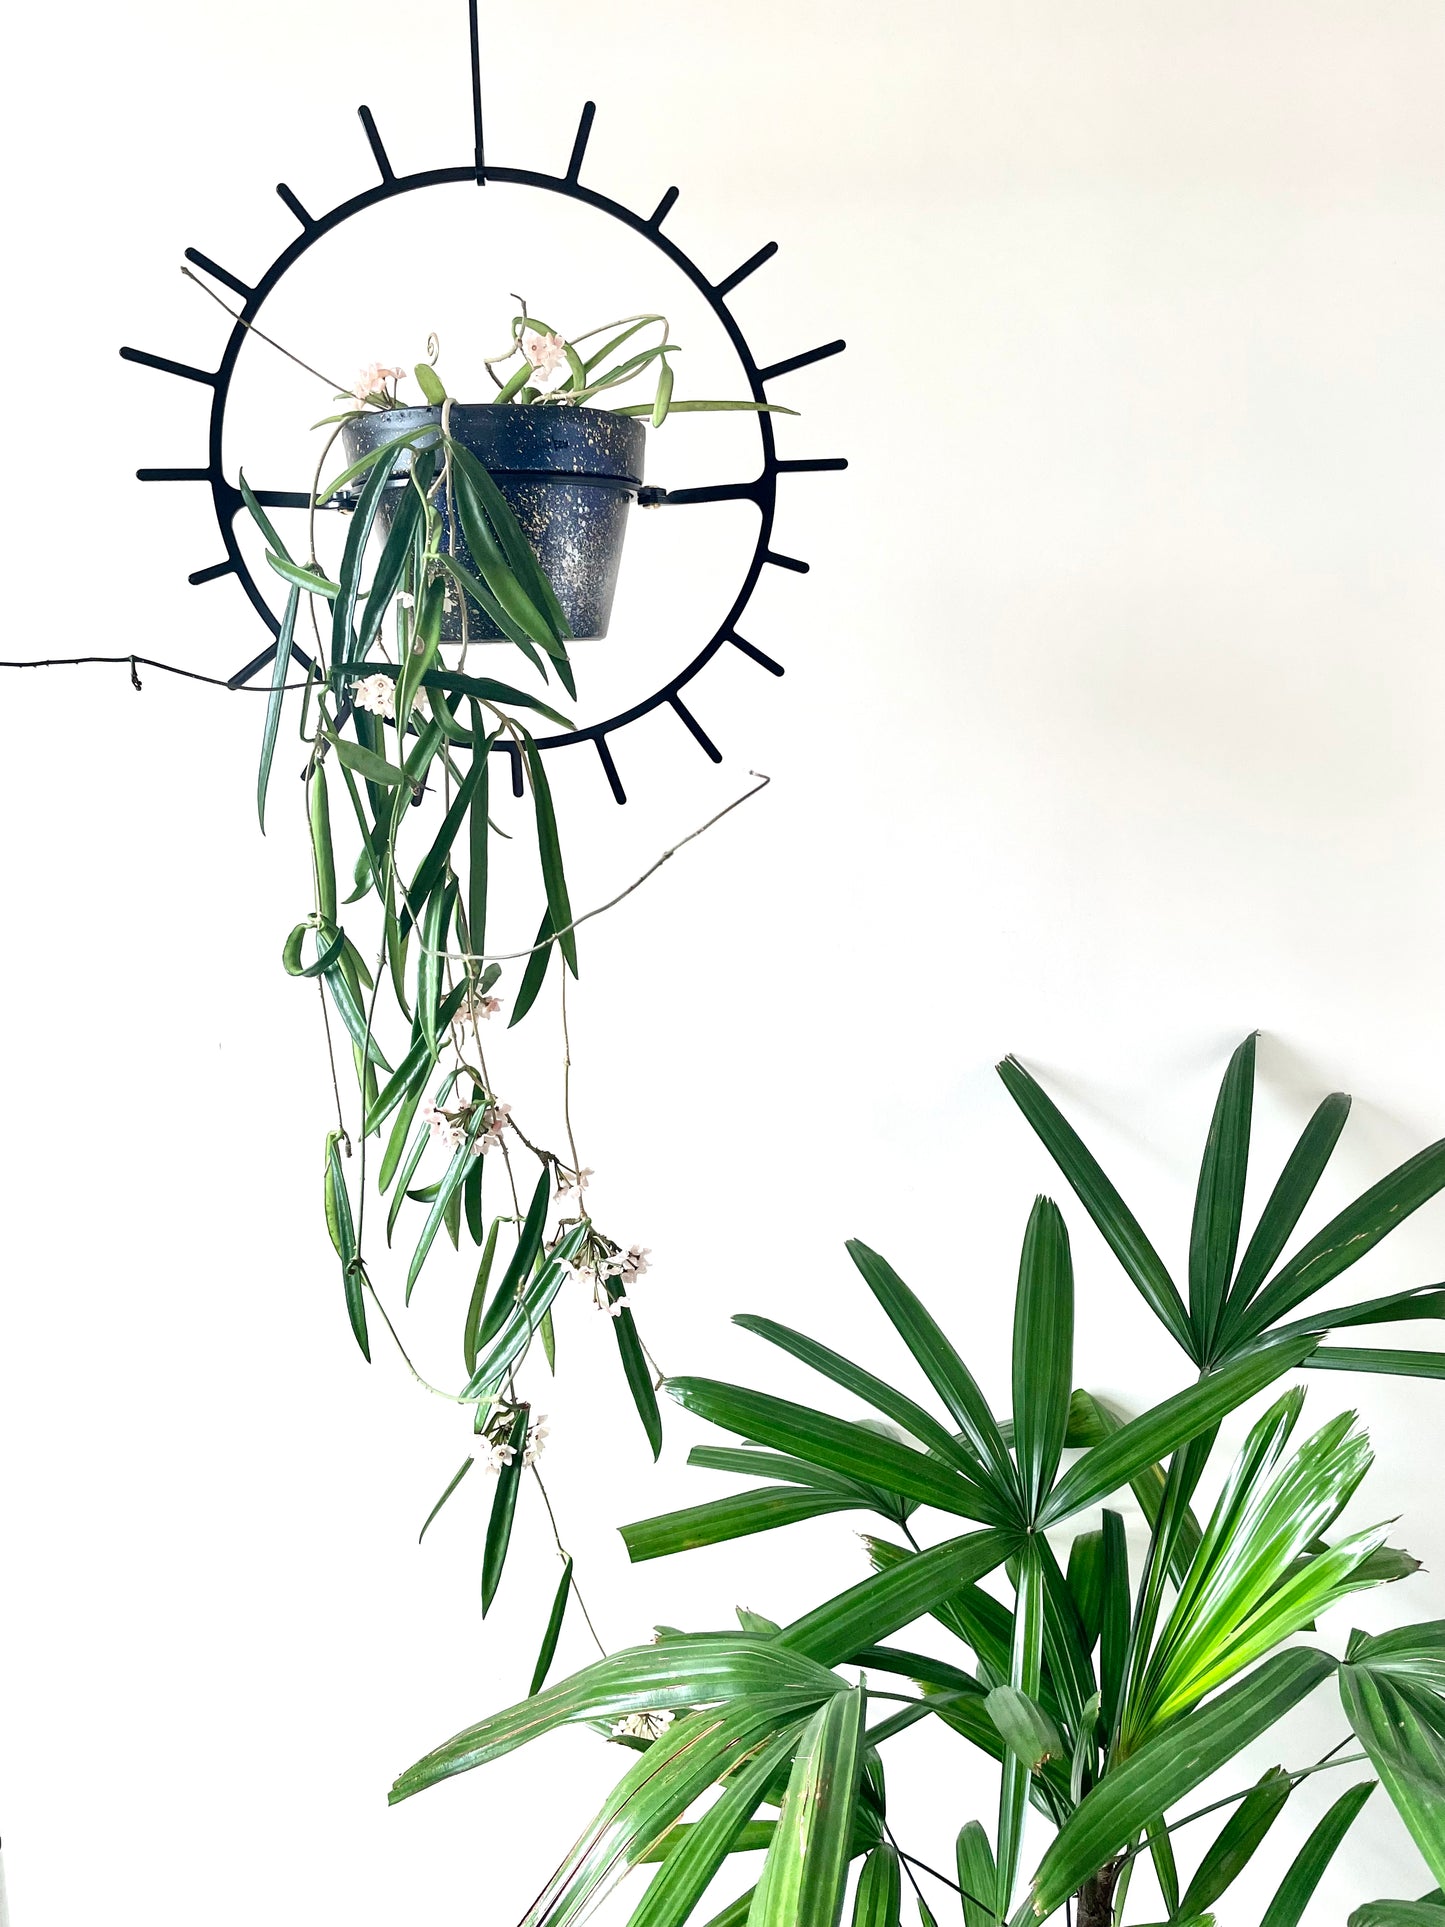 A long leaf hoya with multiple blooms on it is hanging in a round starburst shaped plant hanger, made of steel, black in colour, there is a green palm plant in the bottom right corner.